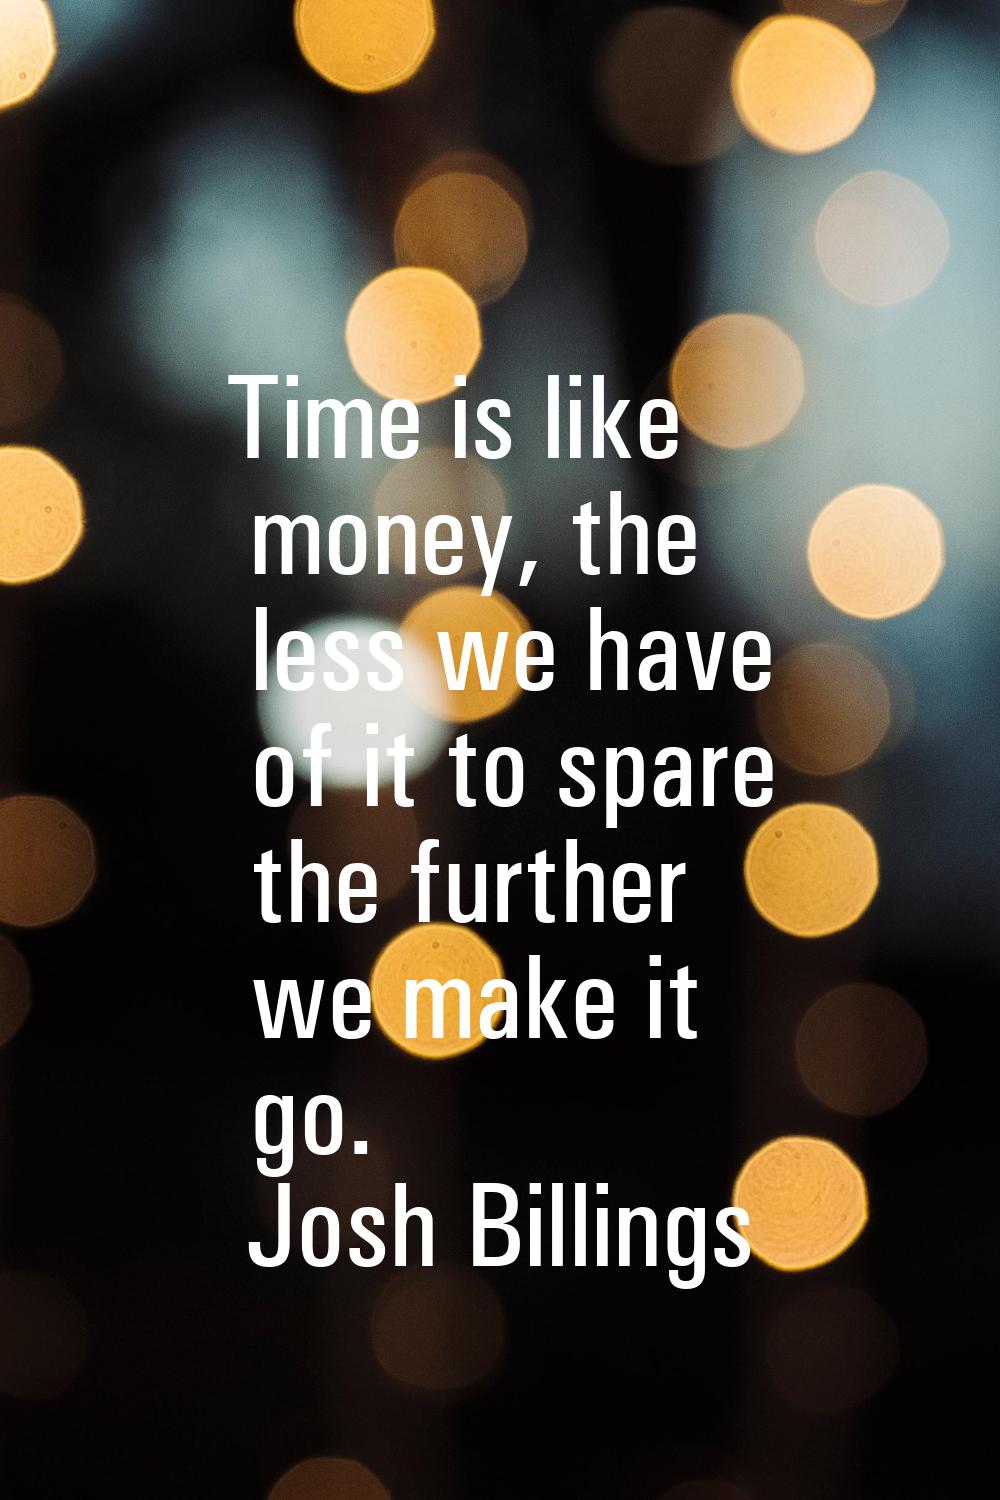 Time is like money, the less we have of it to spare the further we make it go.